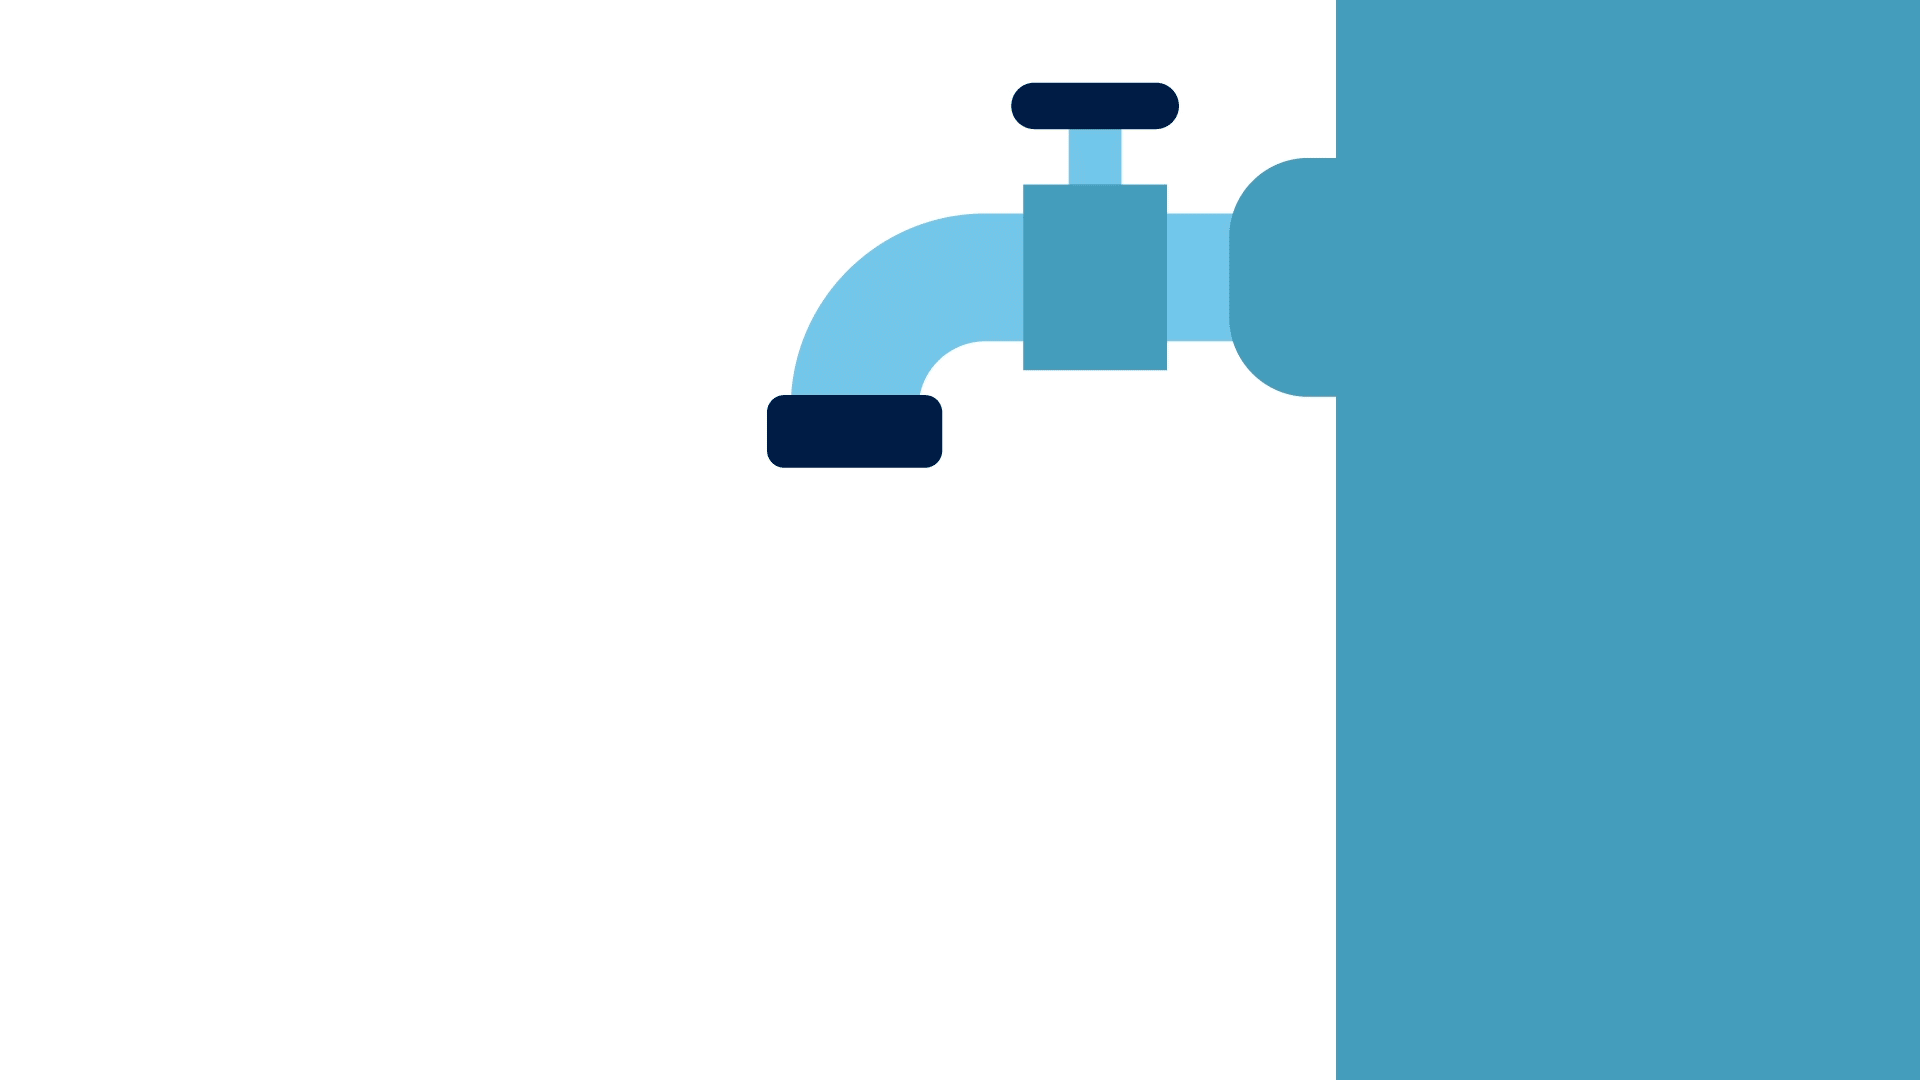 An animation of sink faucet dripping